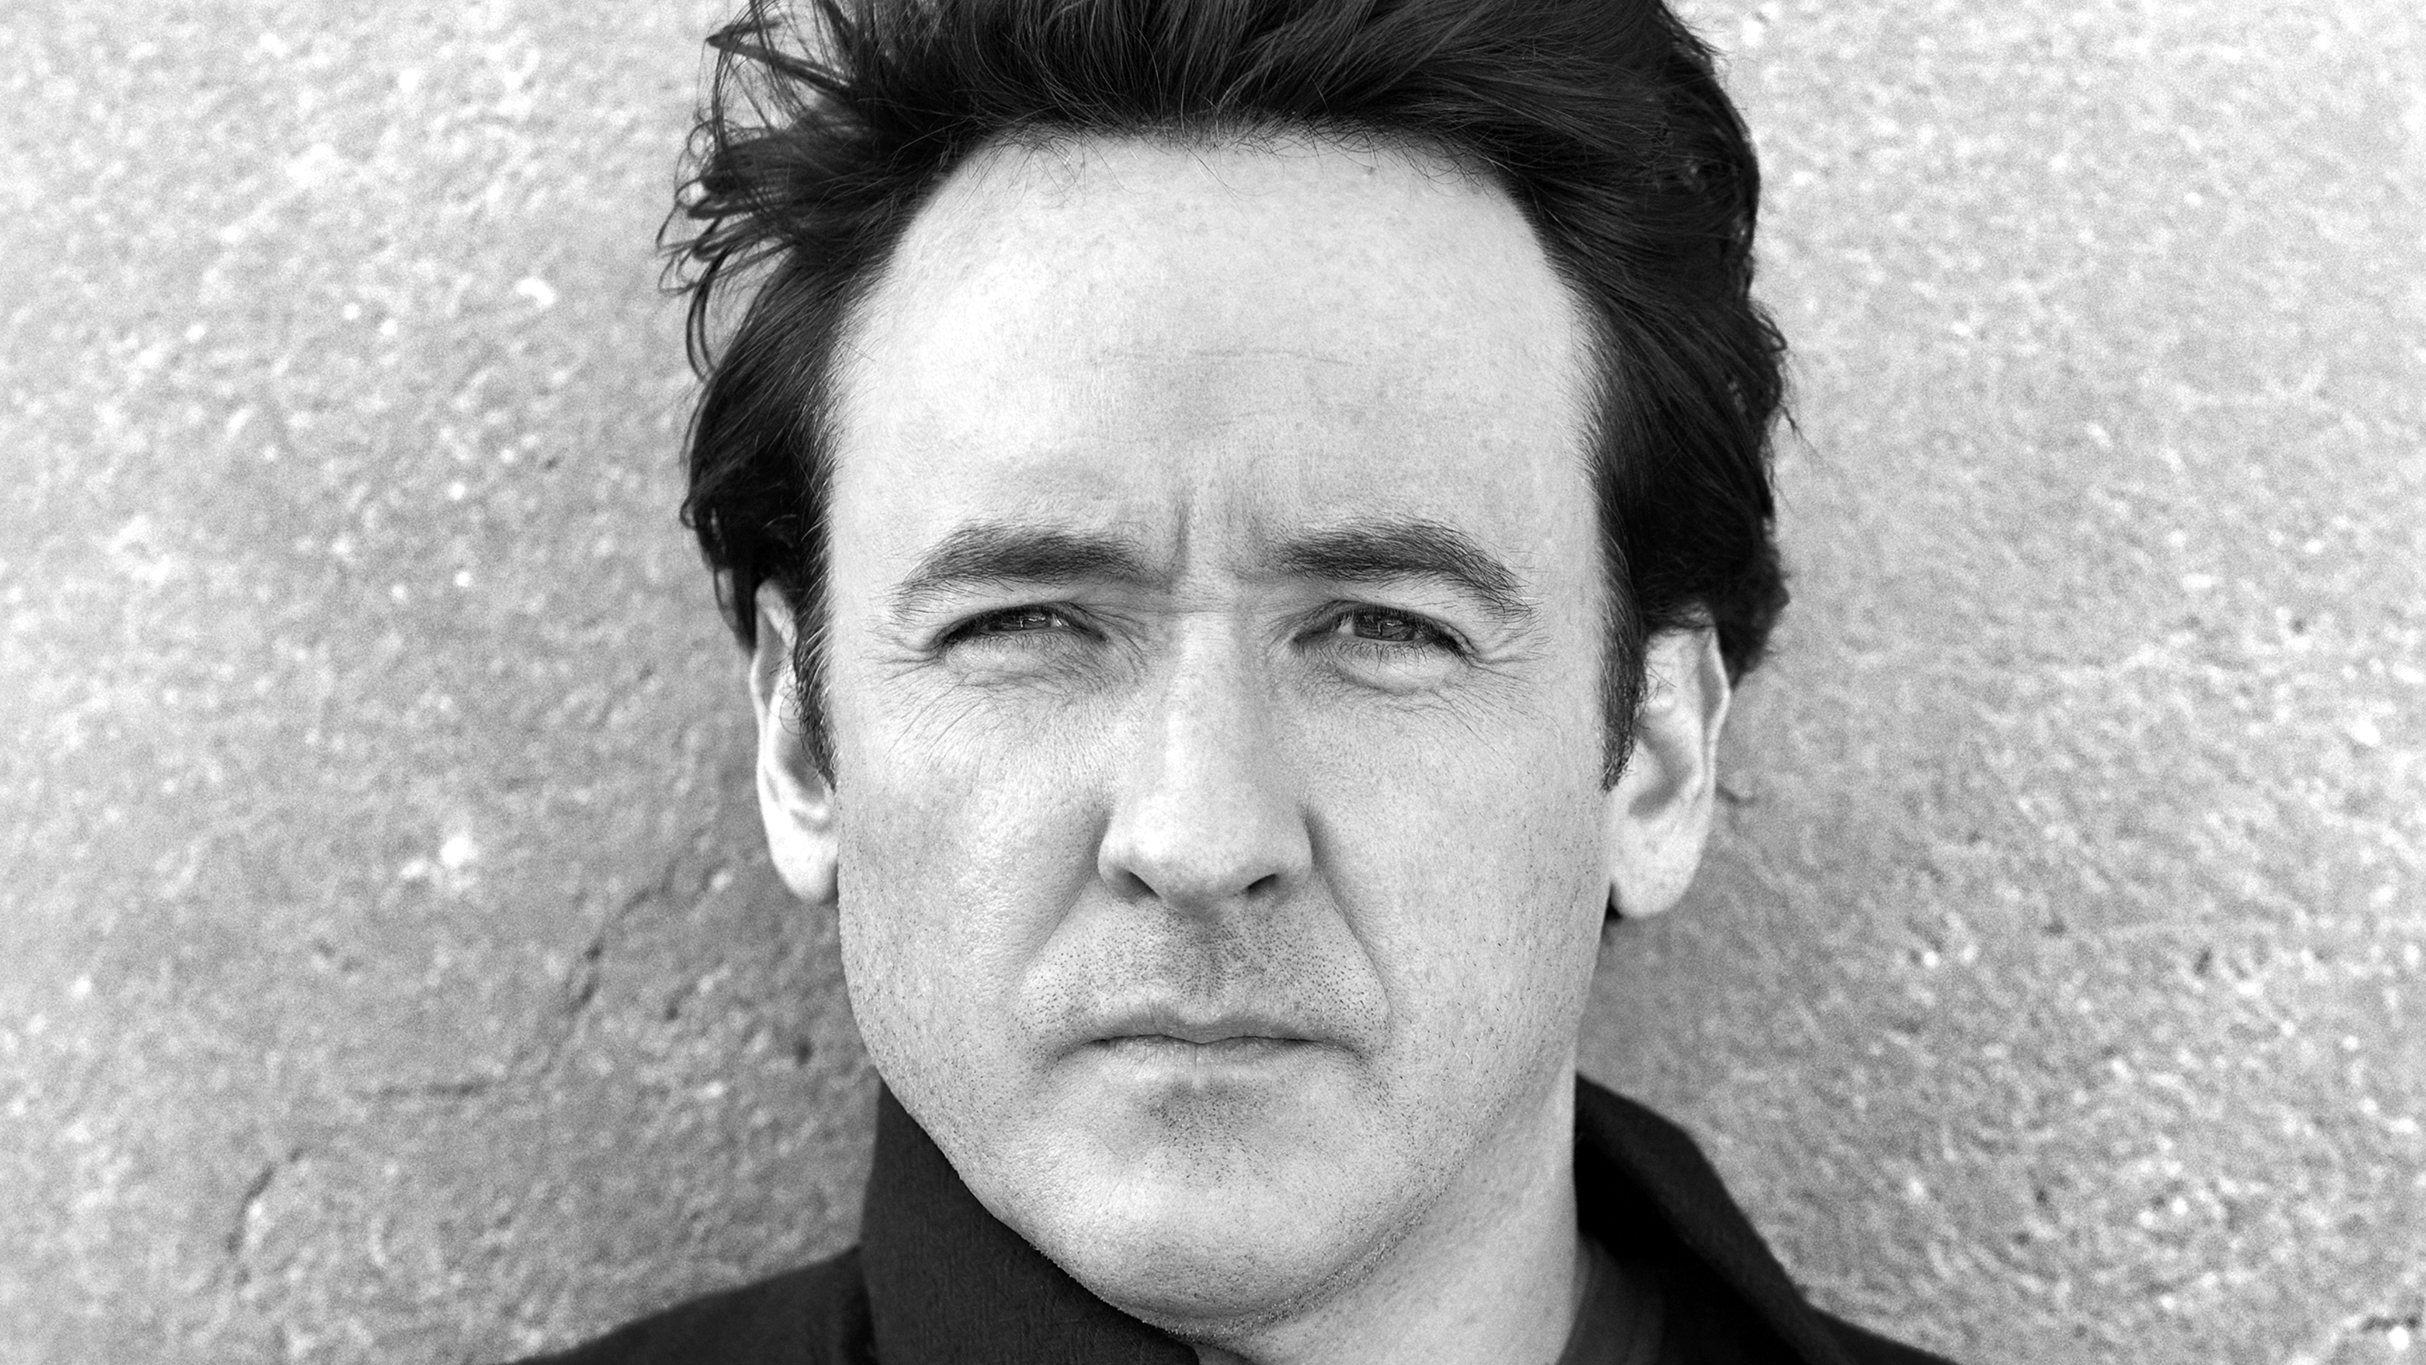 An Evening with John Cusack and Screening of High Fidelity